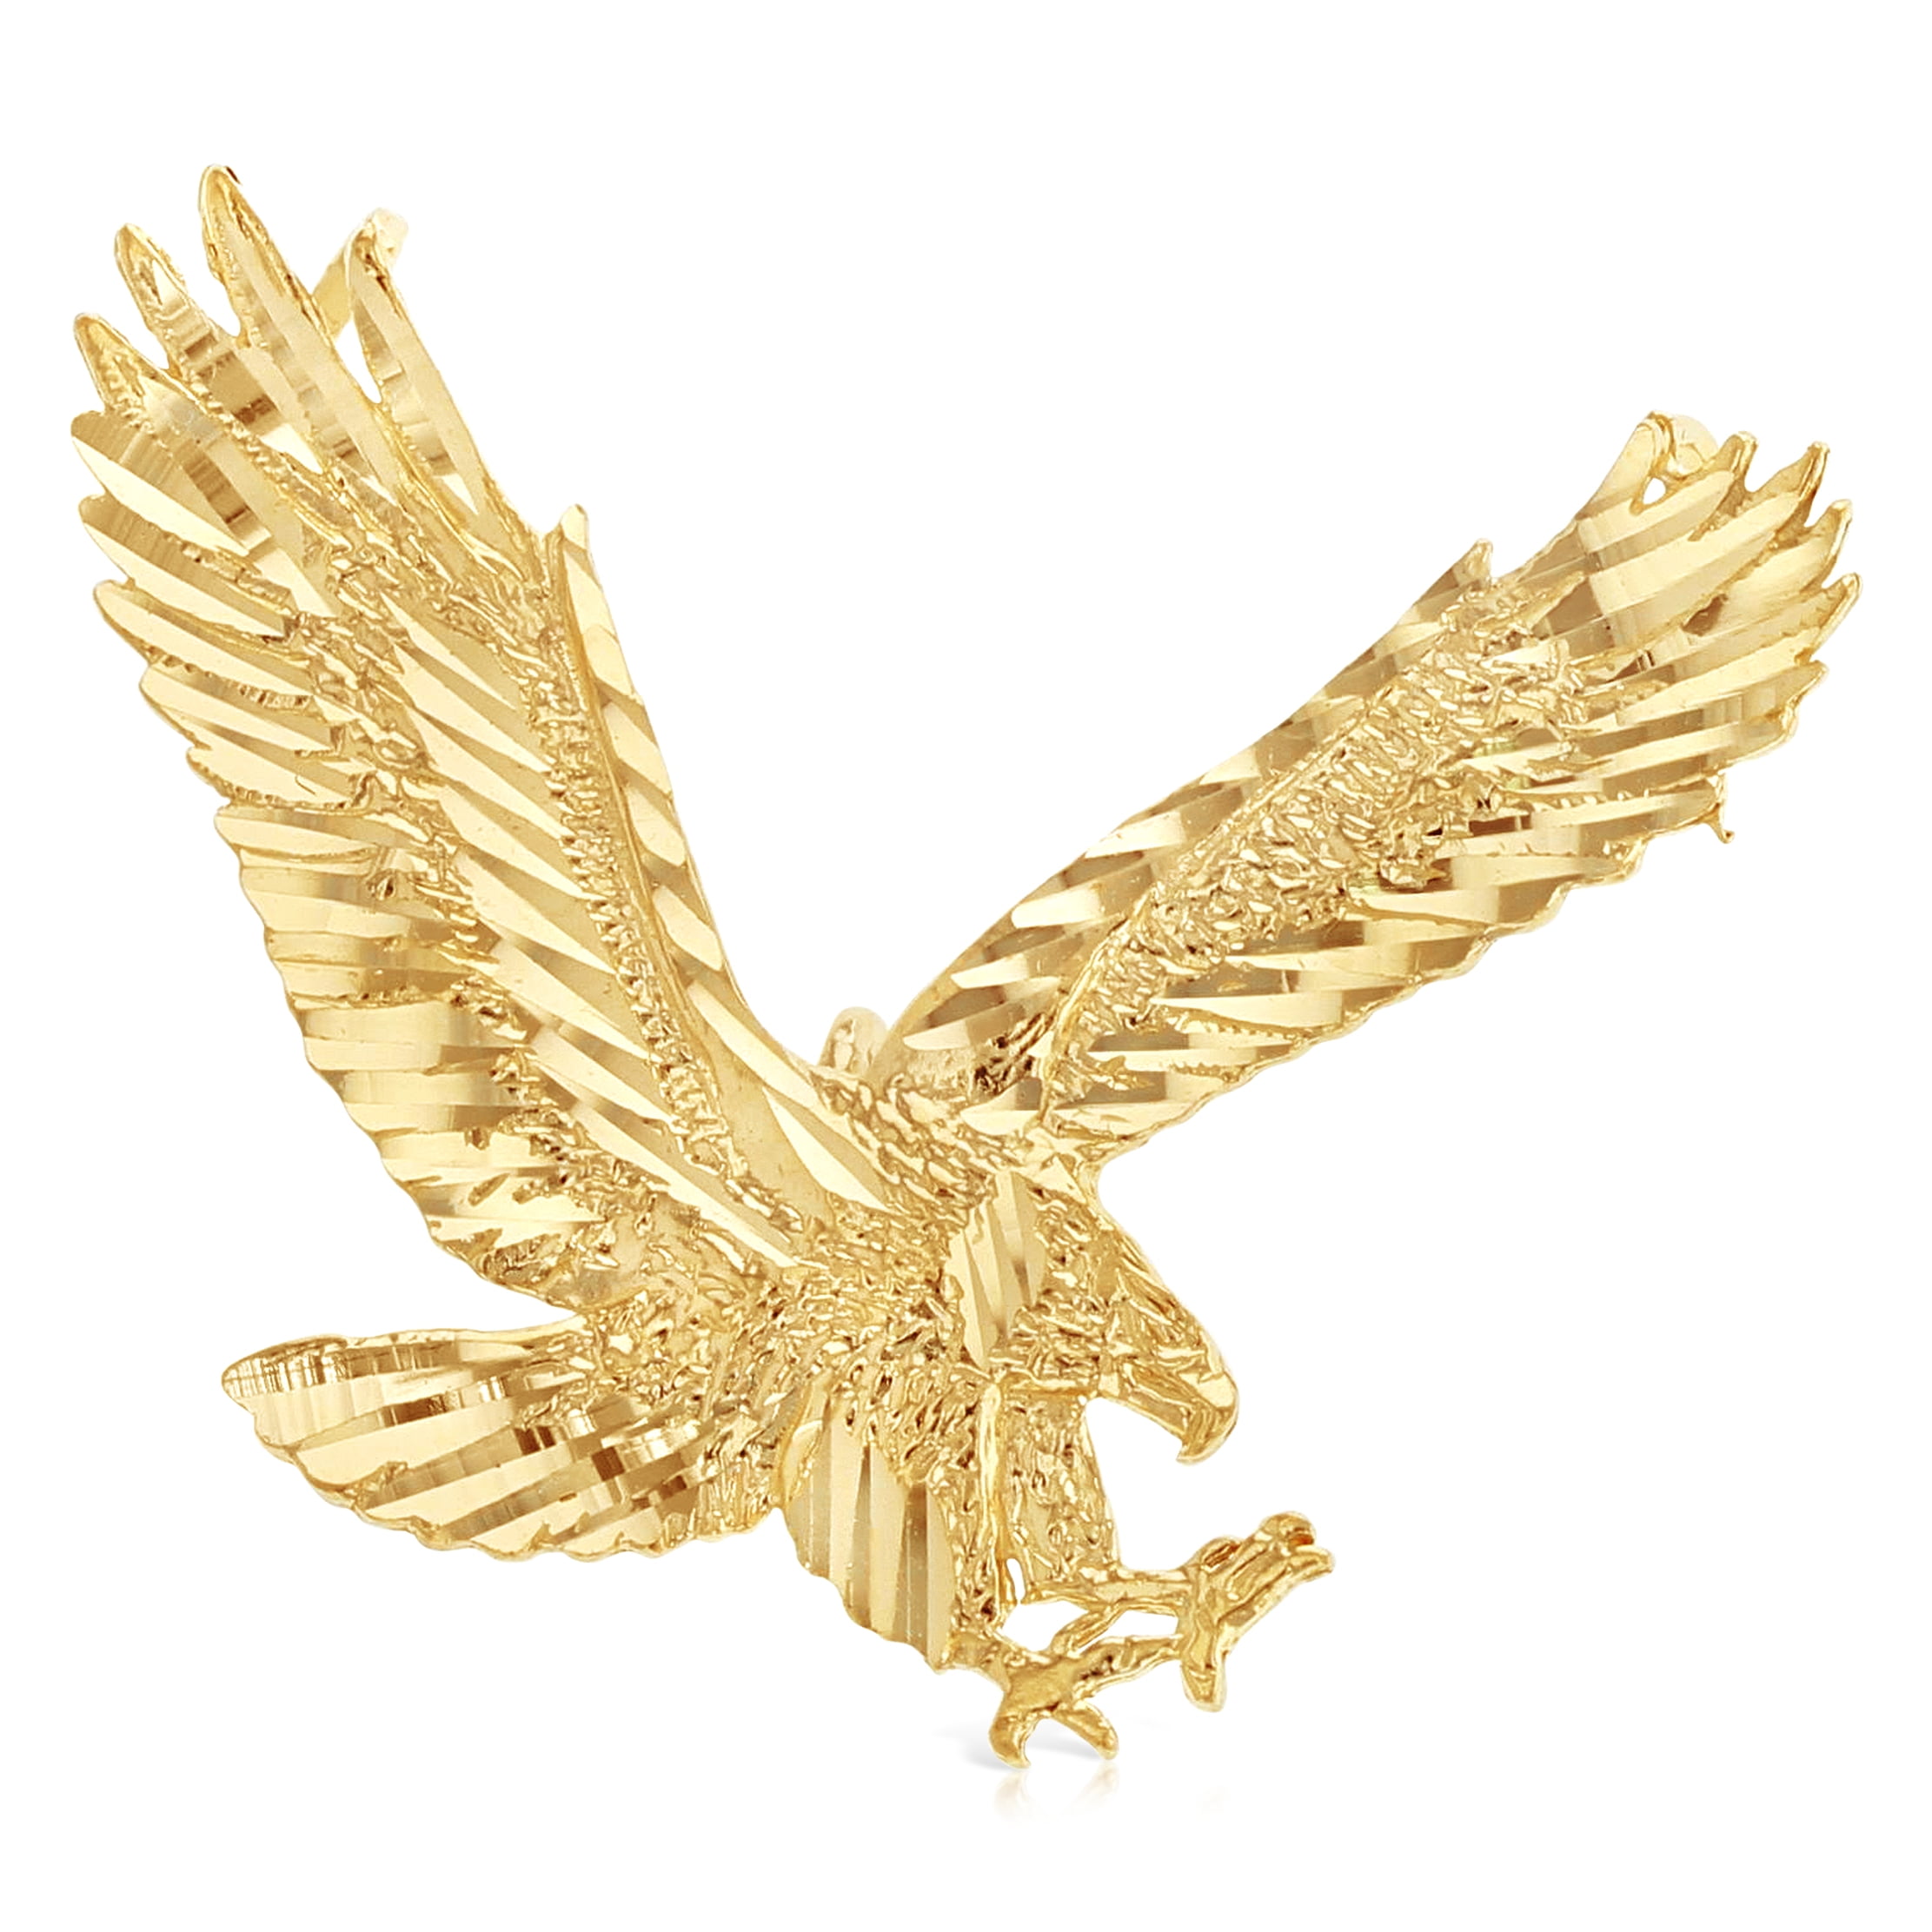 14K Yellow Gold Eagle Charm Pendant For Necklace or Chain - Walmart.com